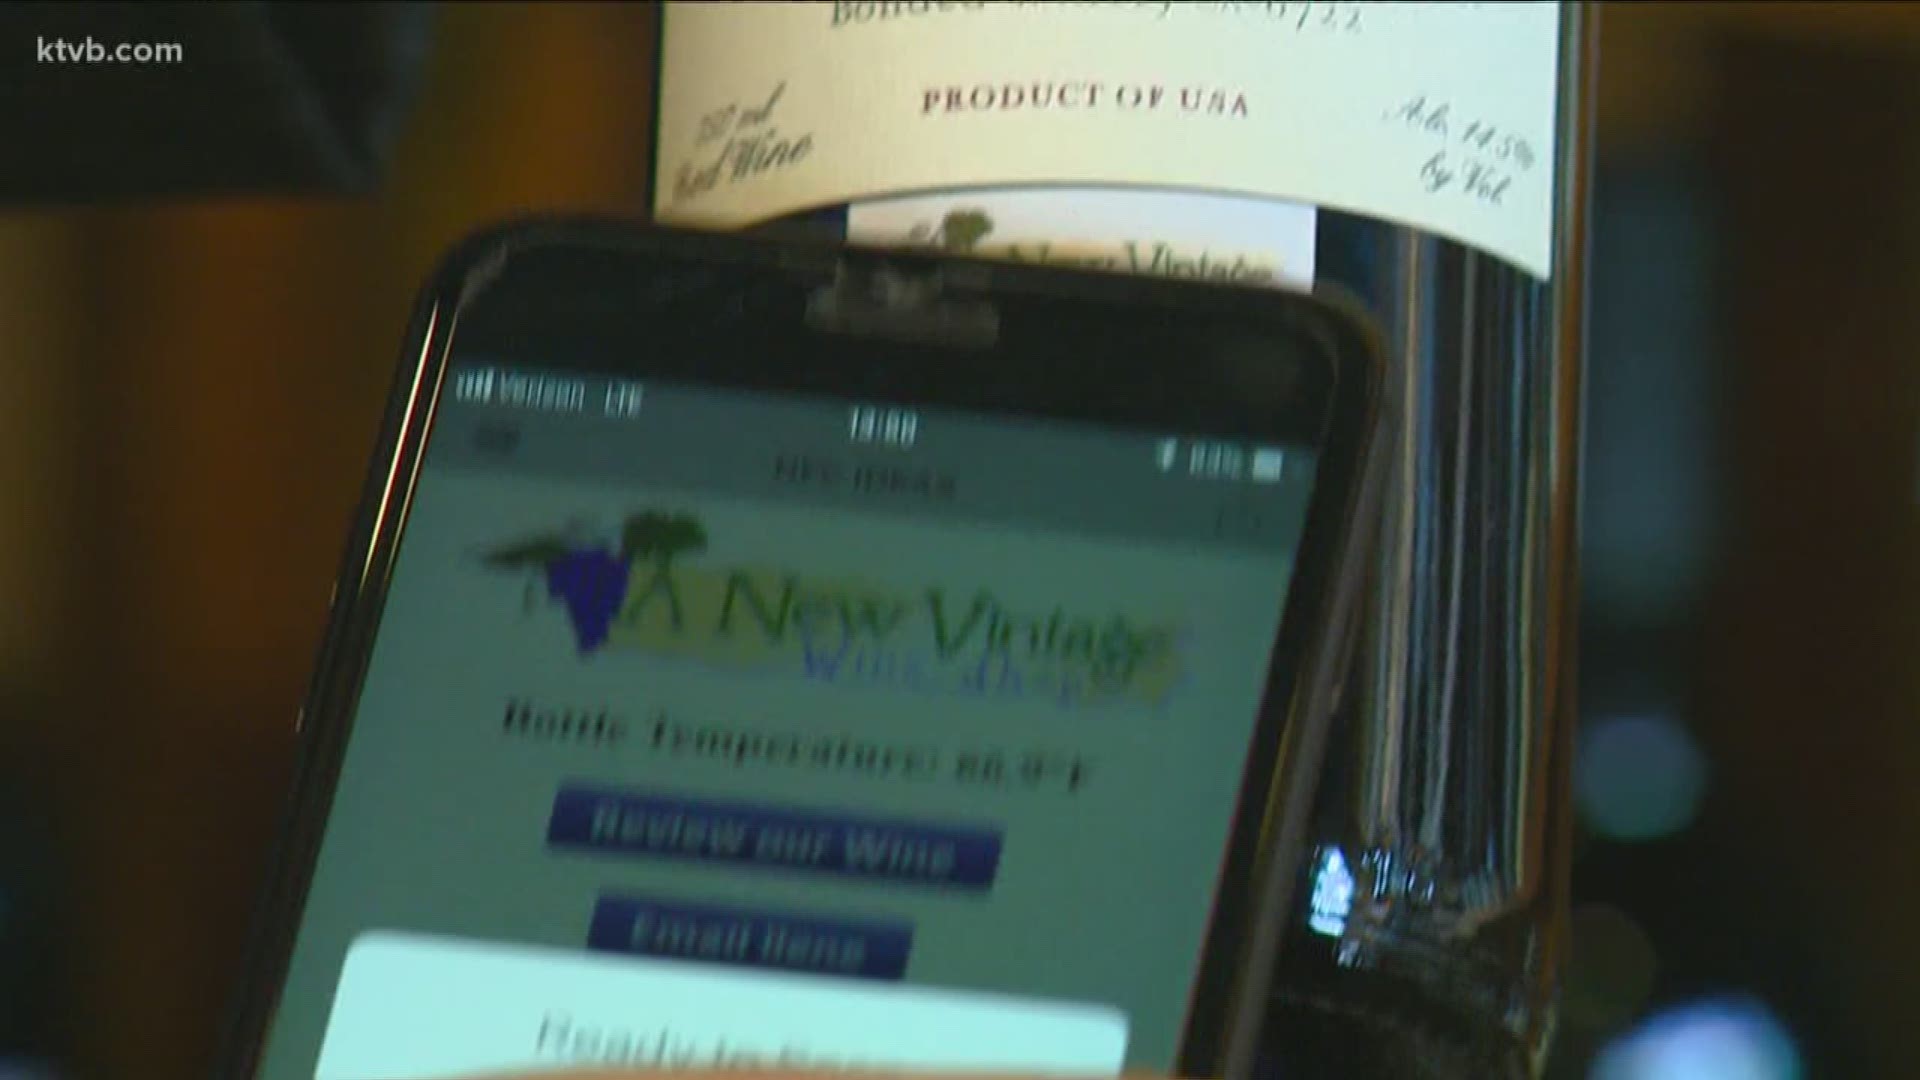 New flexible computer chip technology from Idaho company American Semiconductor is making it's way into a place you would not expect it to be, like a wine shop. This new tech allows New Vintage Wine Shop to give customers more information about the wine, or share feedback on it.